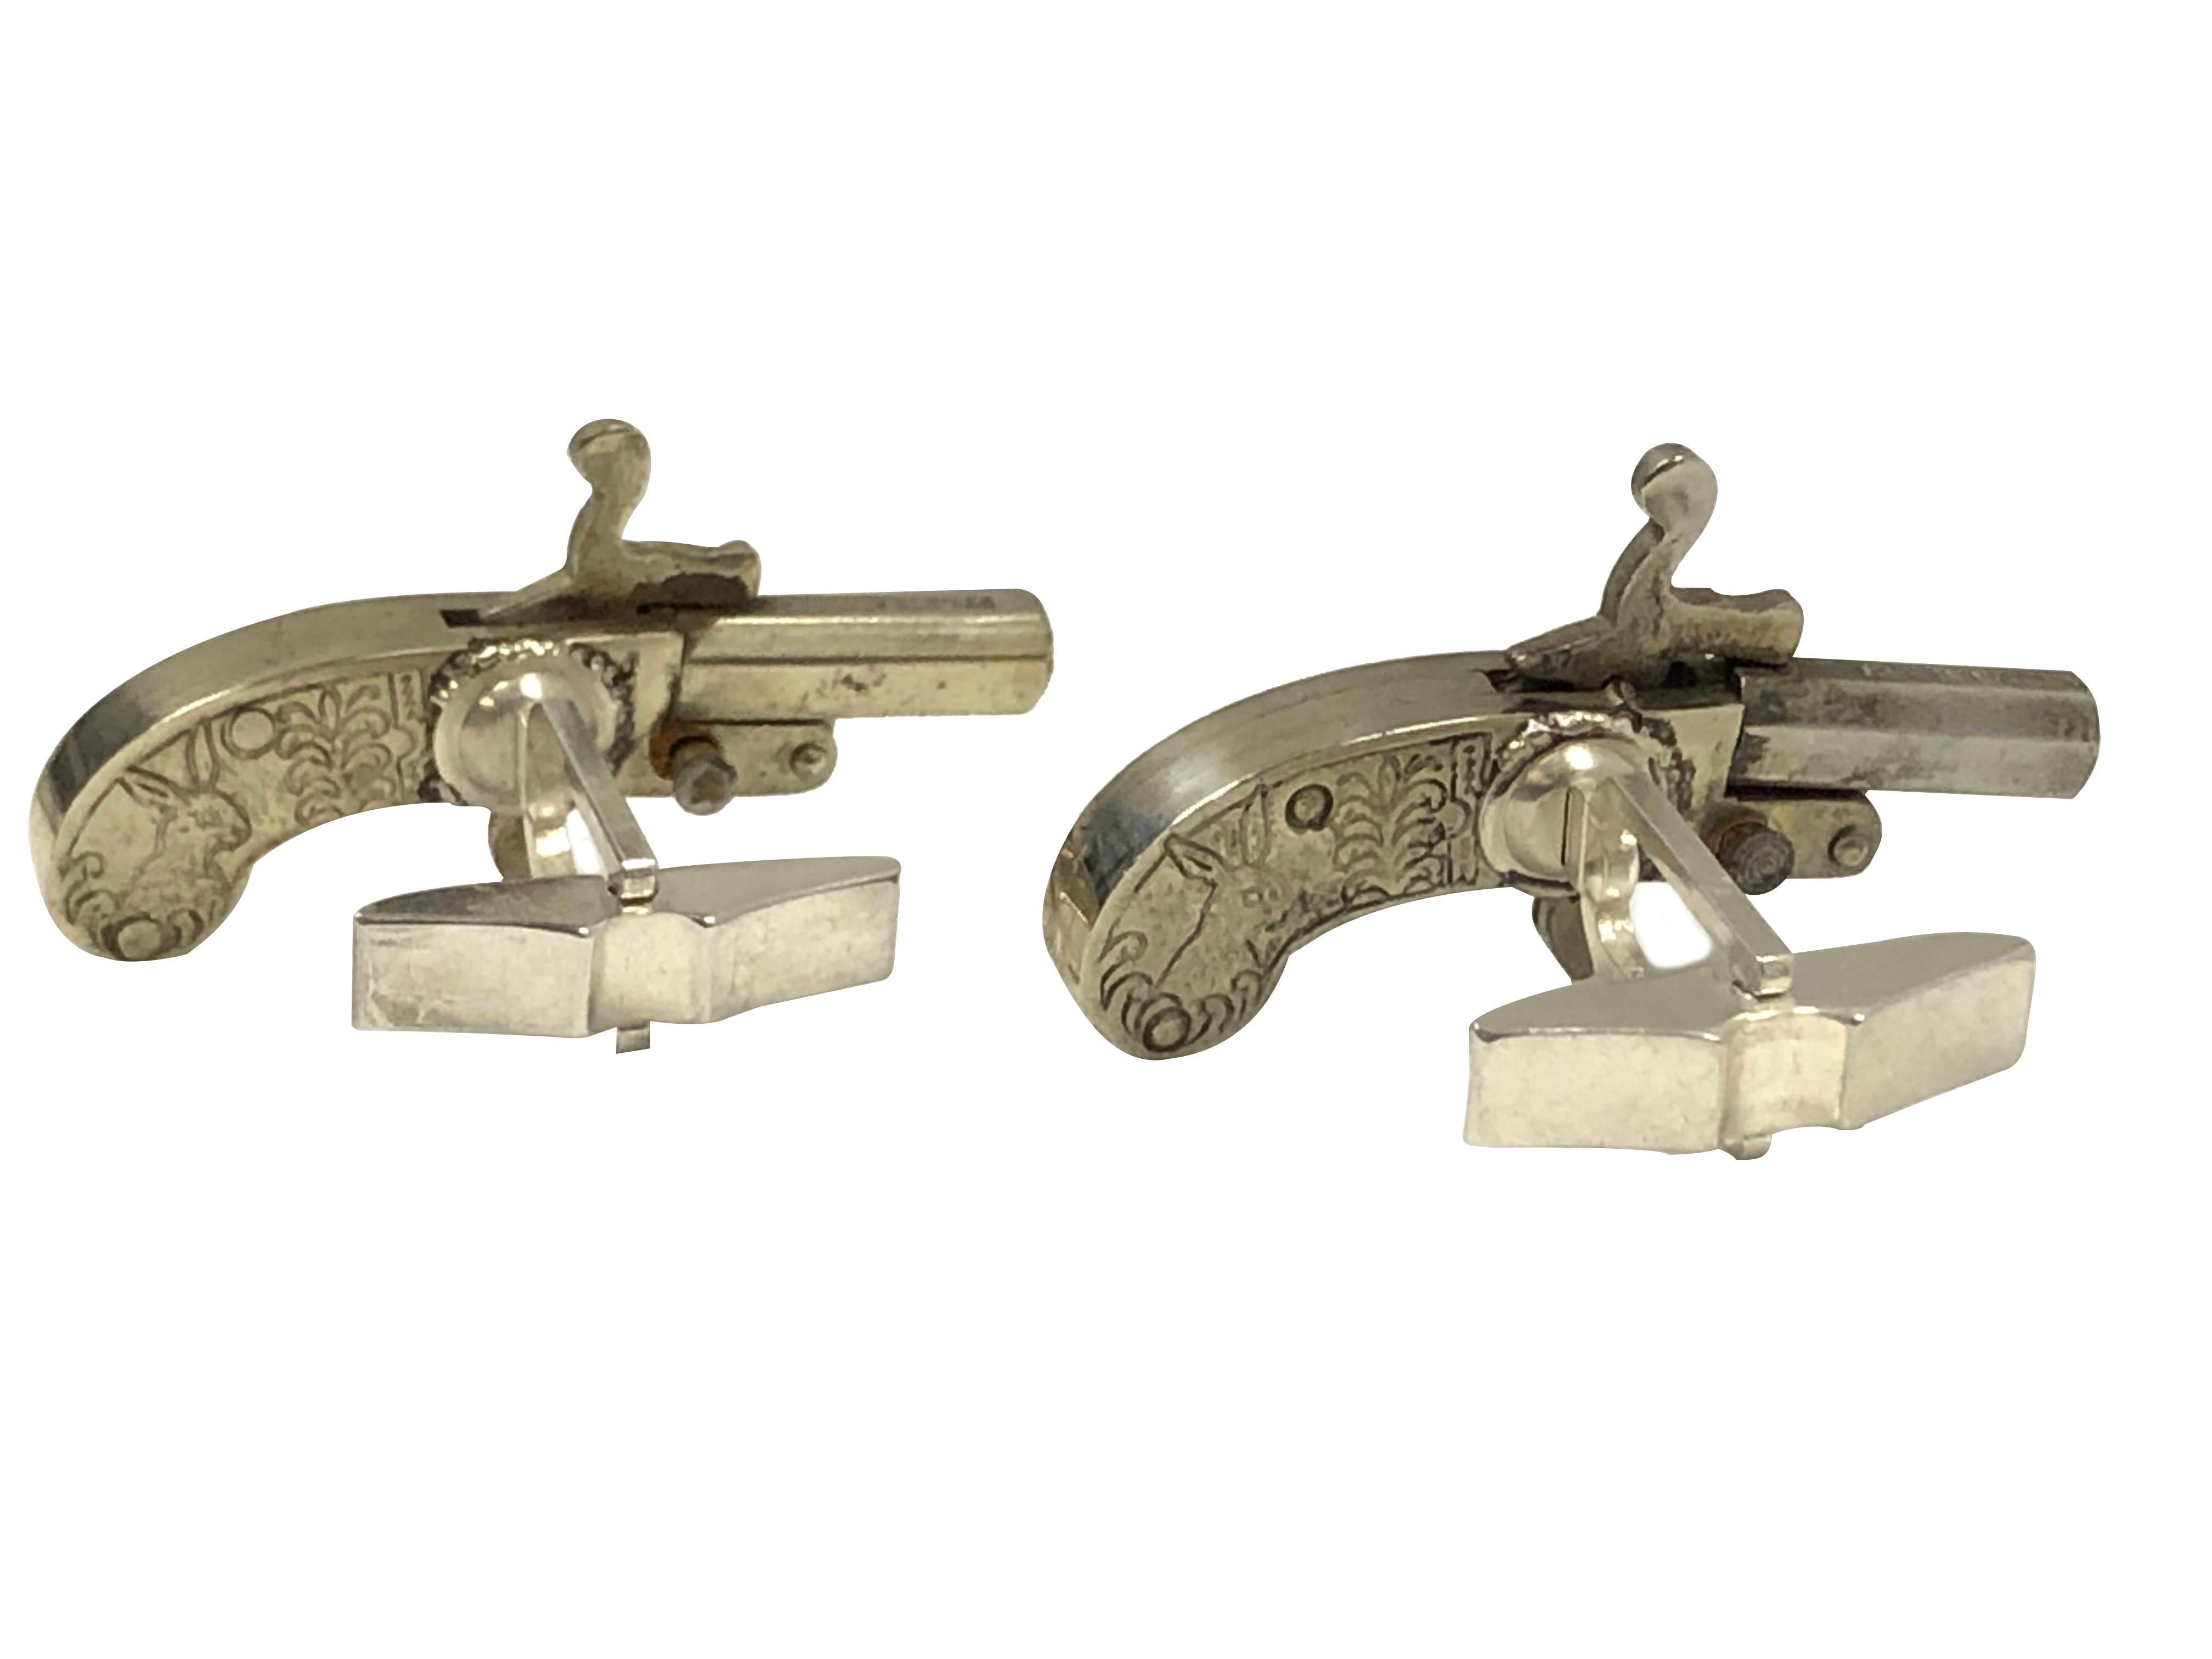 Circa 1930 Austrian Miniature Pistol Cufflinks, Nickle metal, measuring 1 1/2 inch in length, Sterling Silver Toggle backs for easy on and off, all mechanics on these are fully functional as these originally fired a cap.